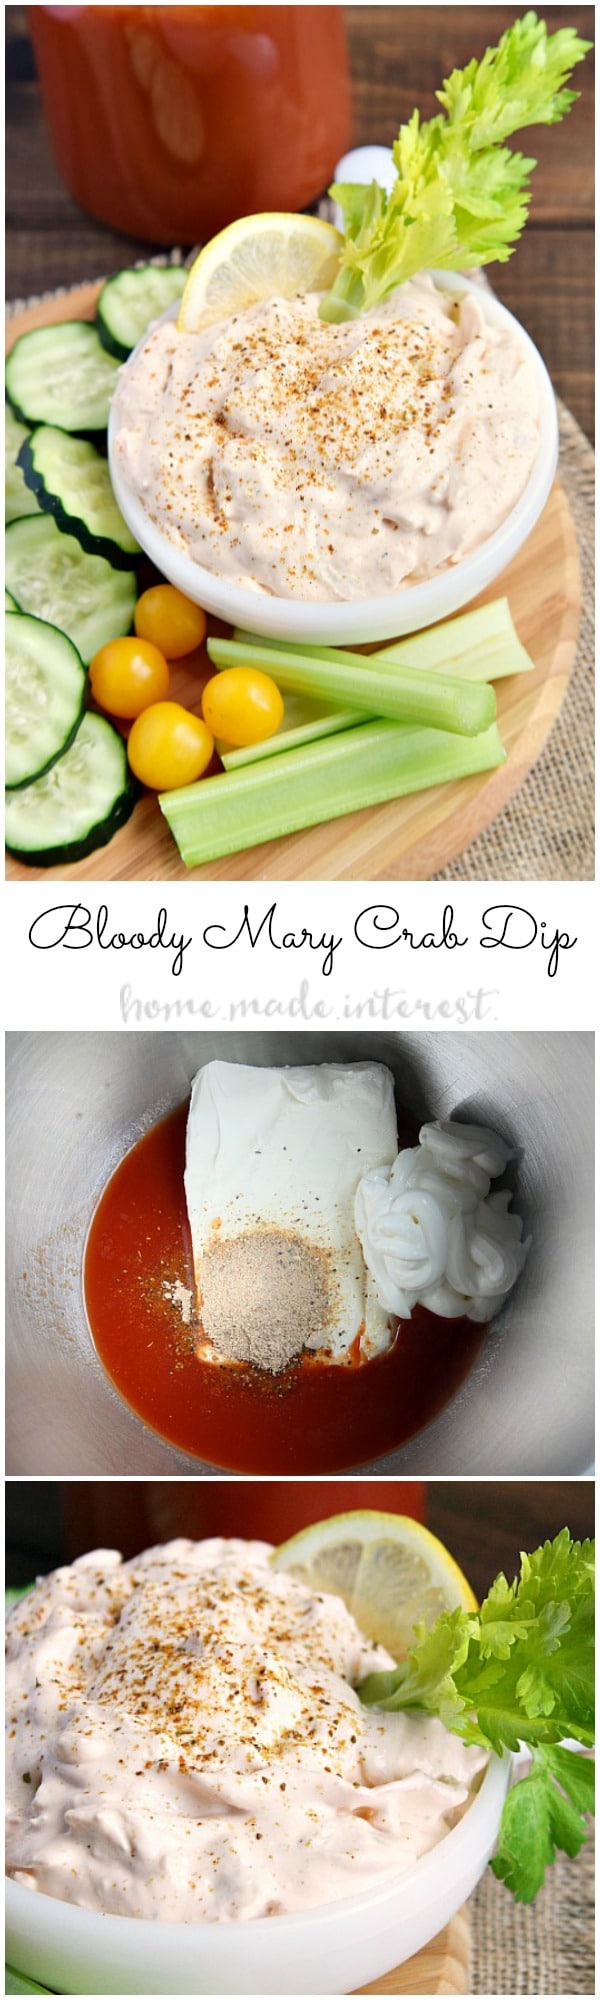 This creamy Bloody Mary crab dip is easy and quick to make. If you love bloody mary drinks than will fall in love with this party dip. With just a few ingredients you have a great appetizer dip for any gathering.